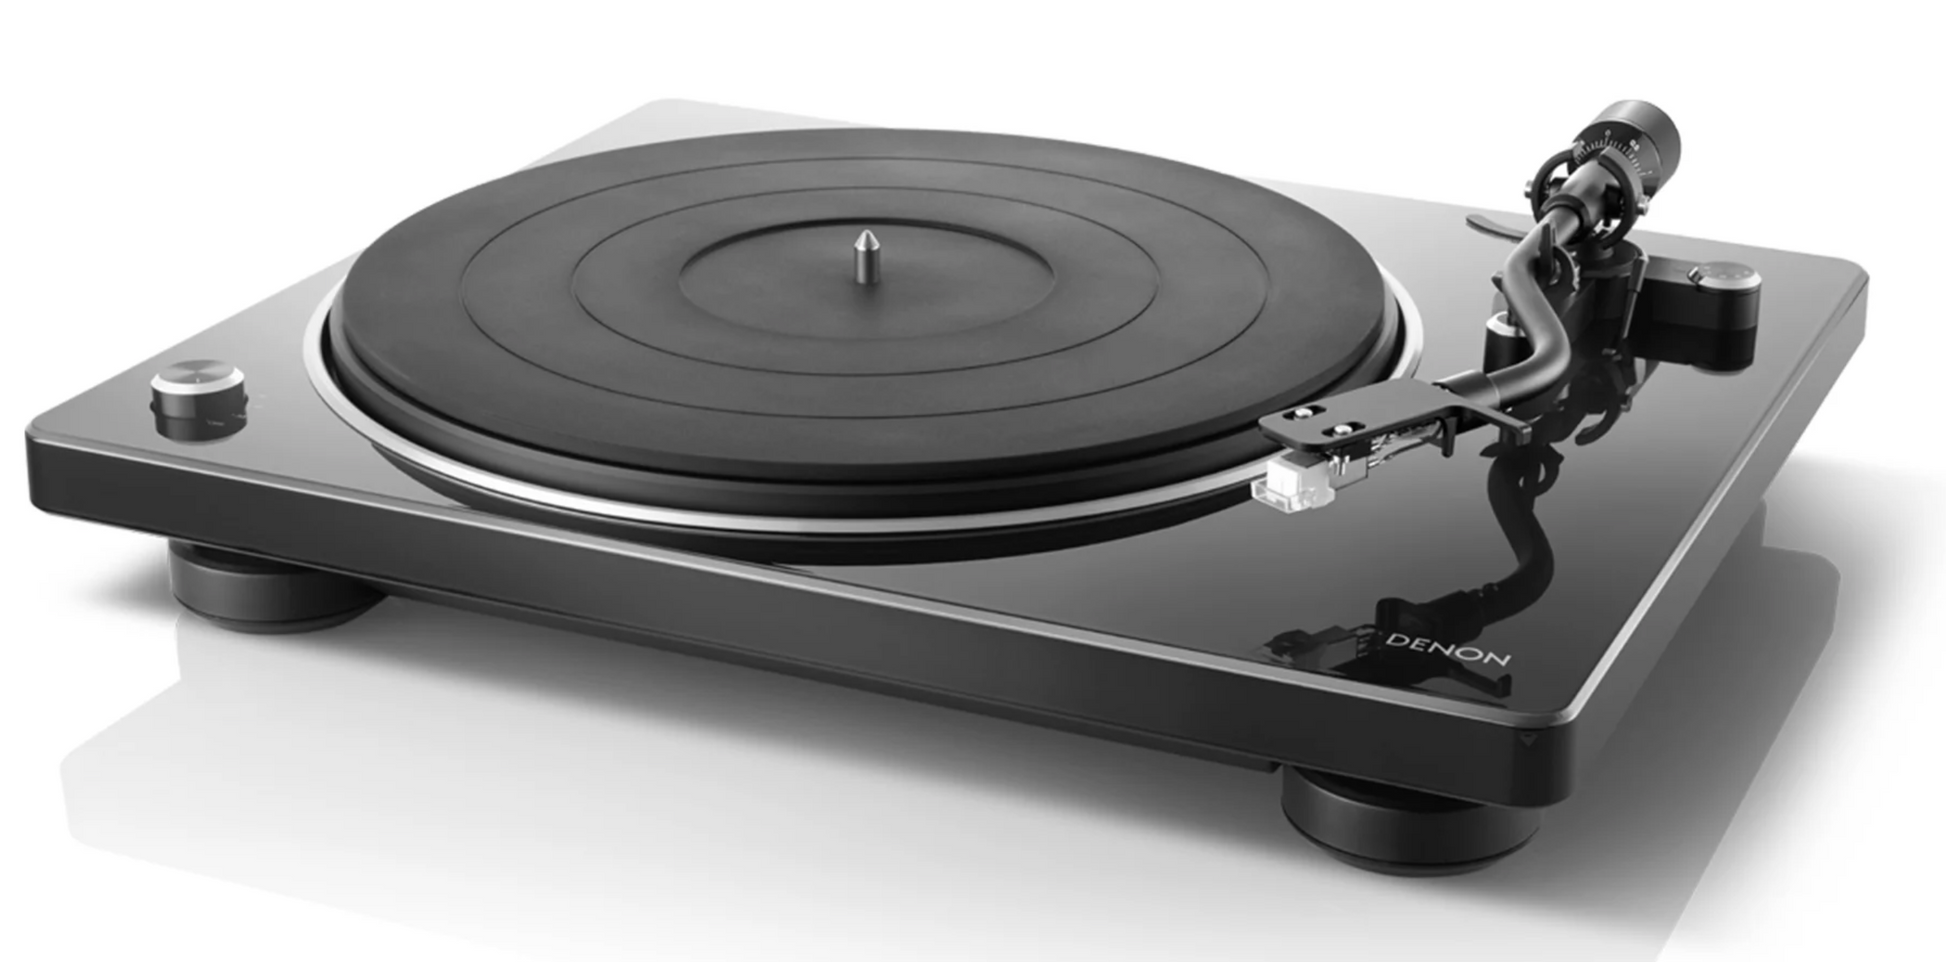 Denon DP-400 Turntable with Built in Phono Preamp, without dustcover